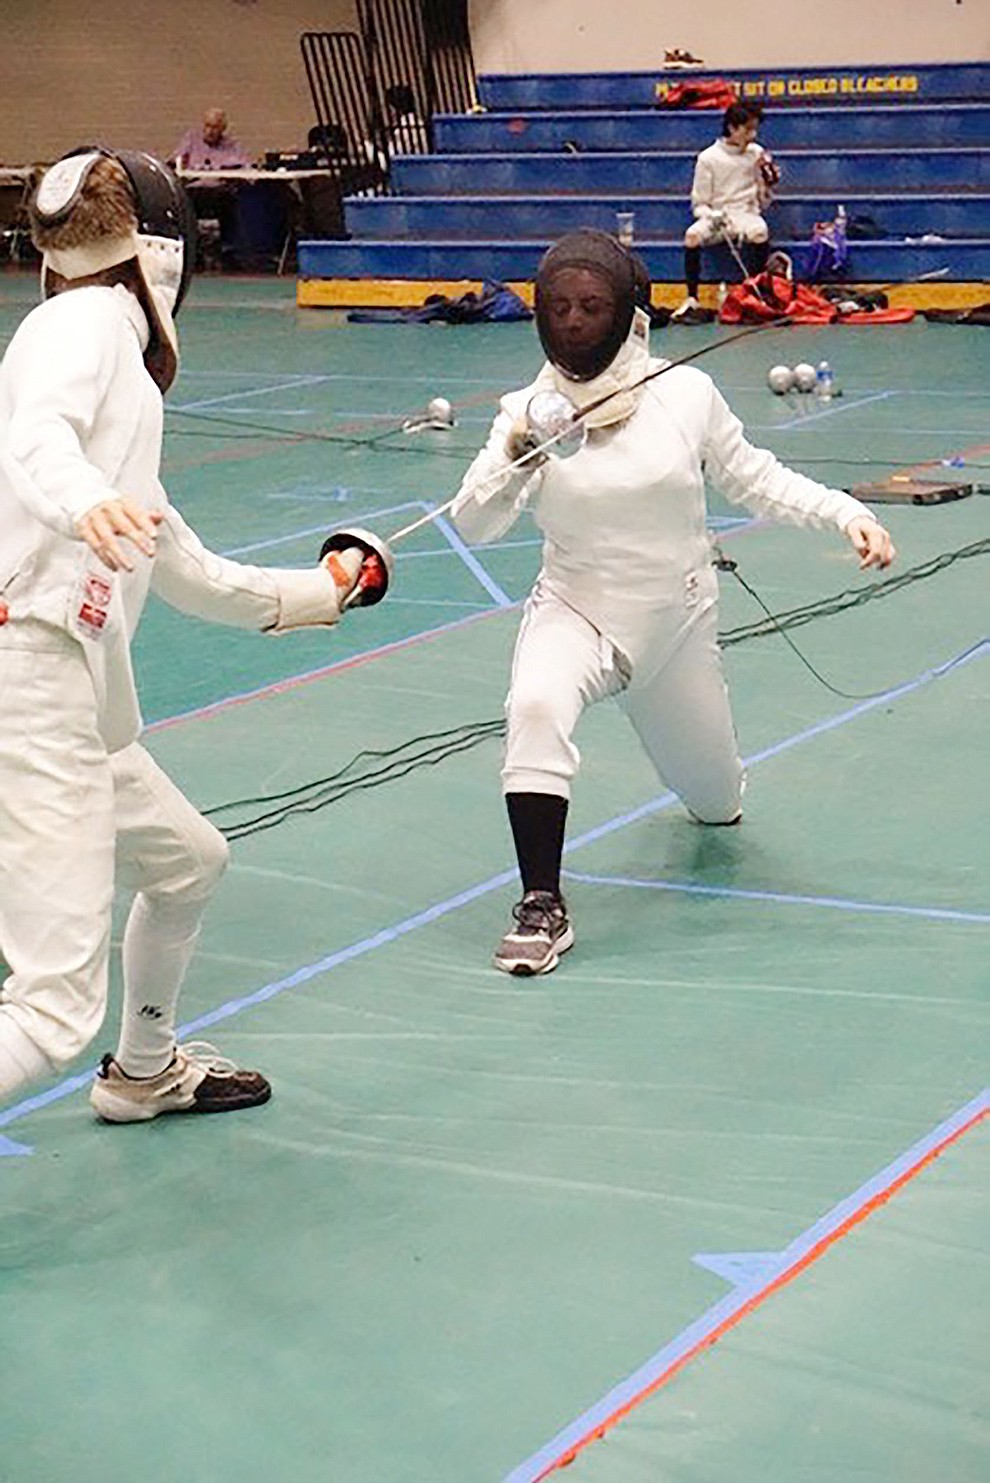 Cassiopeia Andradottir of Salle d’Escrime of Prescott competes during the 25th Annual Prescott Fall Fencing Tournament at Prescott High School on Sunday, Sept. 1, 2019. (Aaron Valdez/Courier)